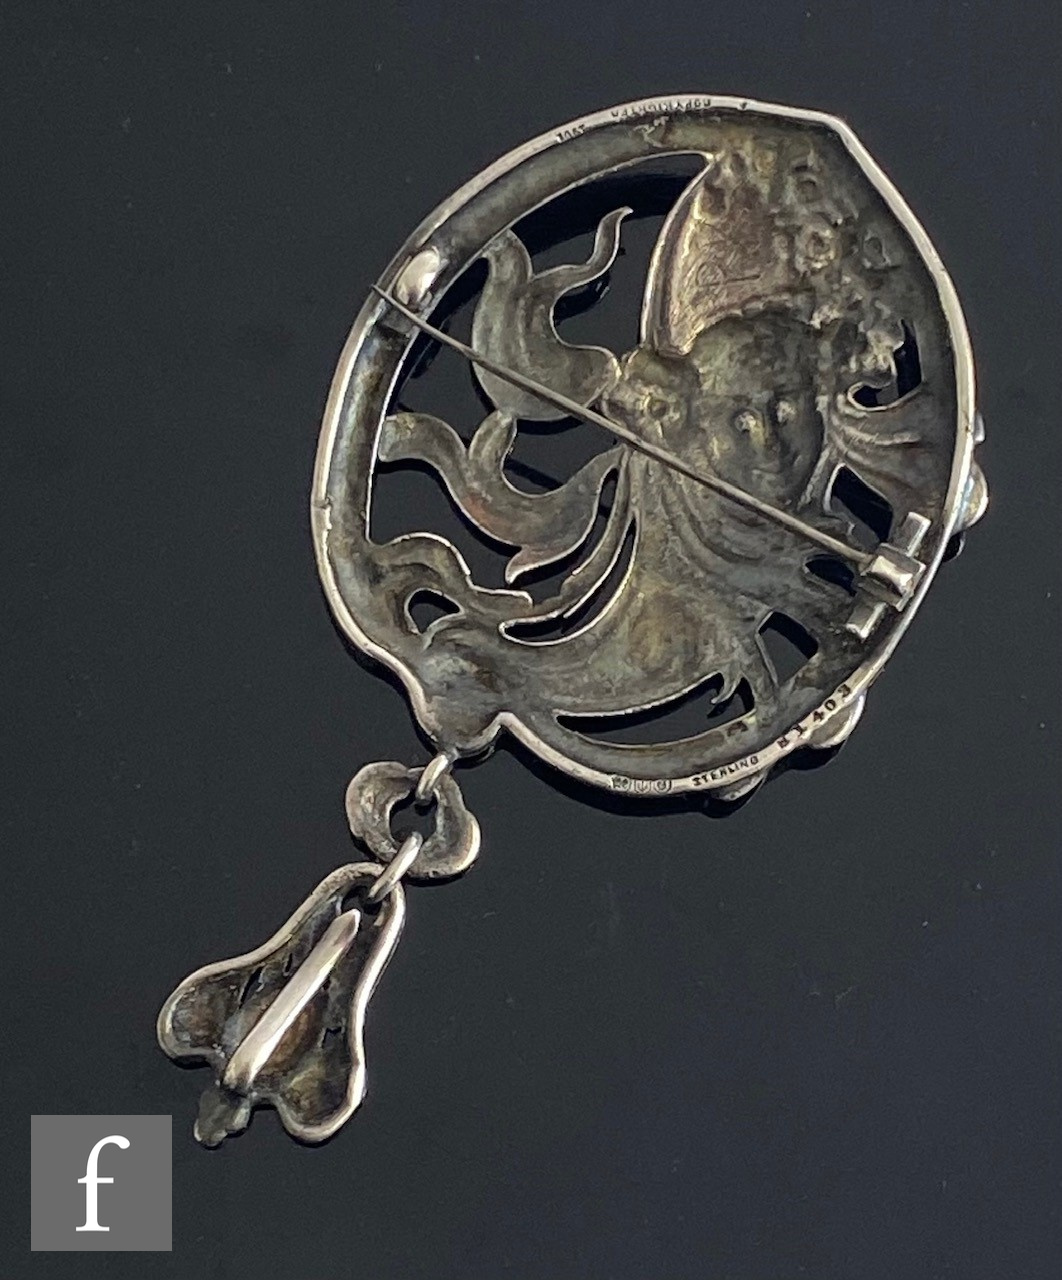 An Art Nouveau American silver brooch designed as the head of a woman with flowing locks above a - Image 3 of 3